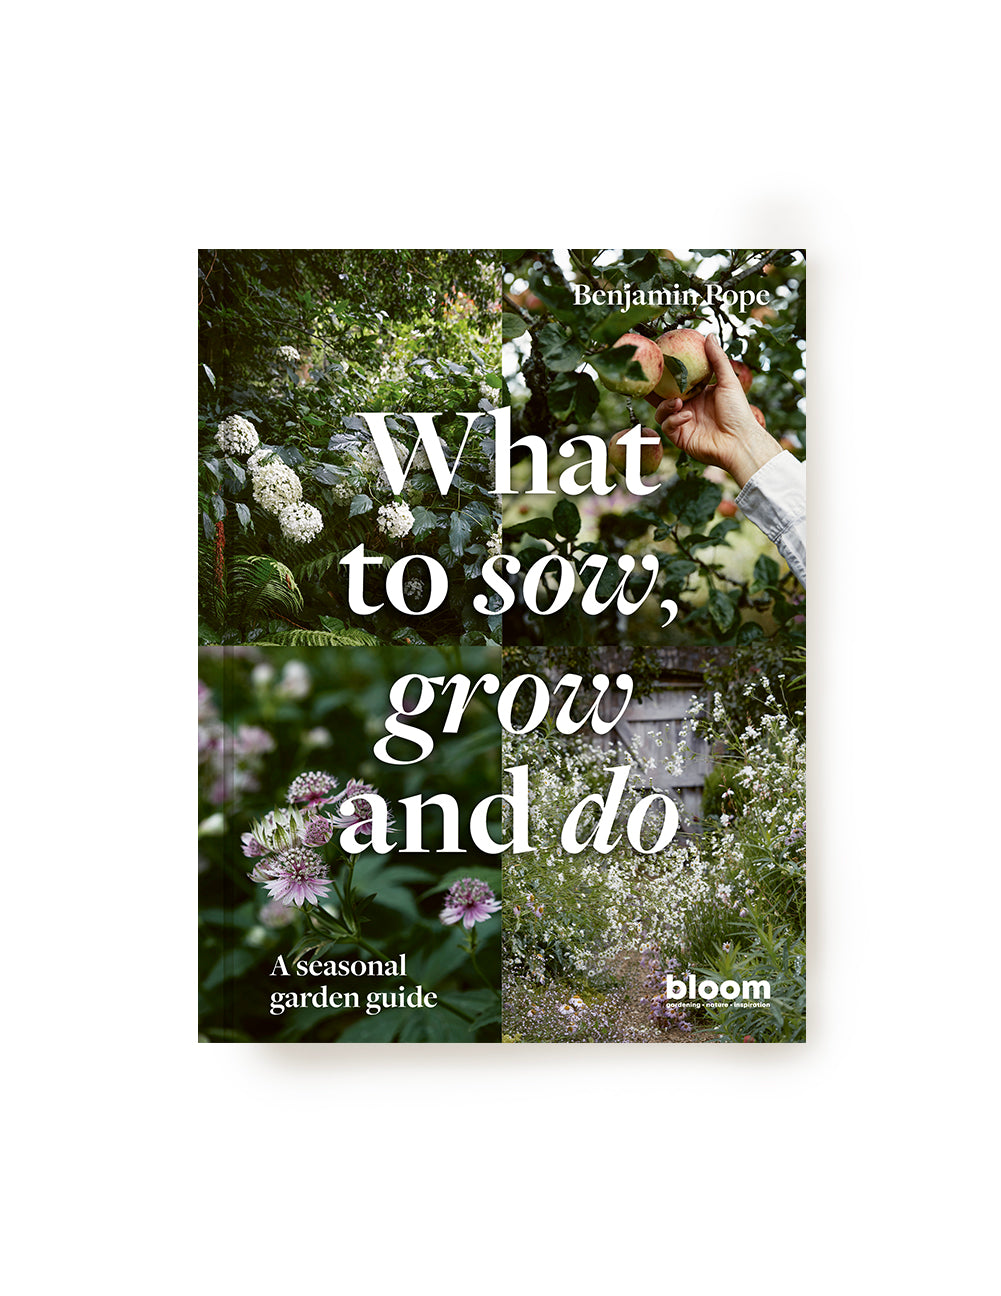 Book. What To Sow, Grow and Do. A Seasonal Garden Guide